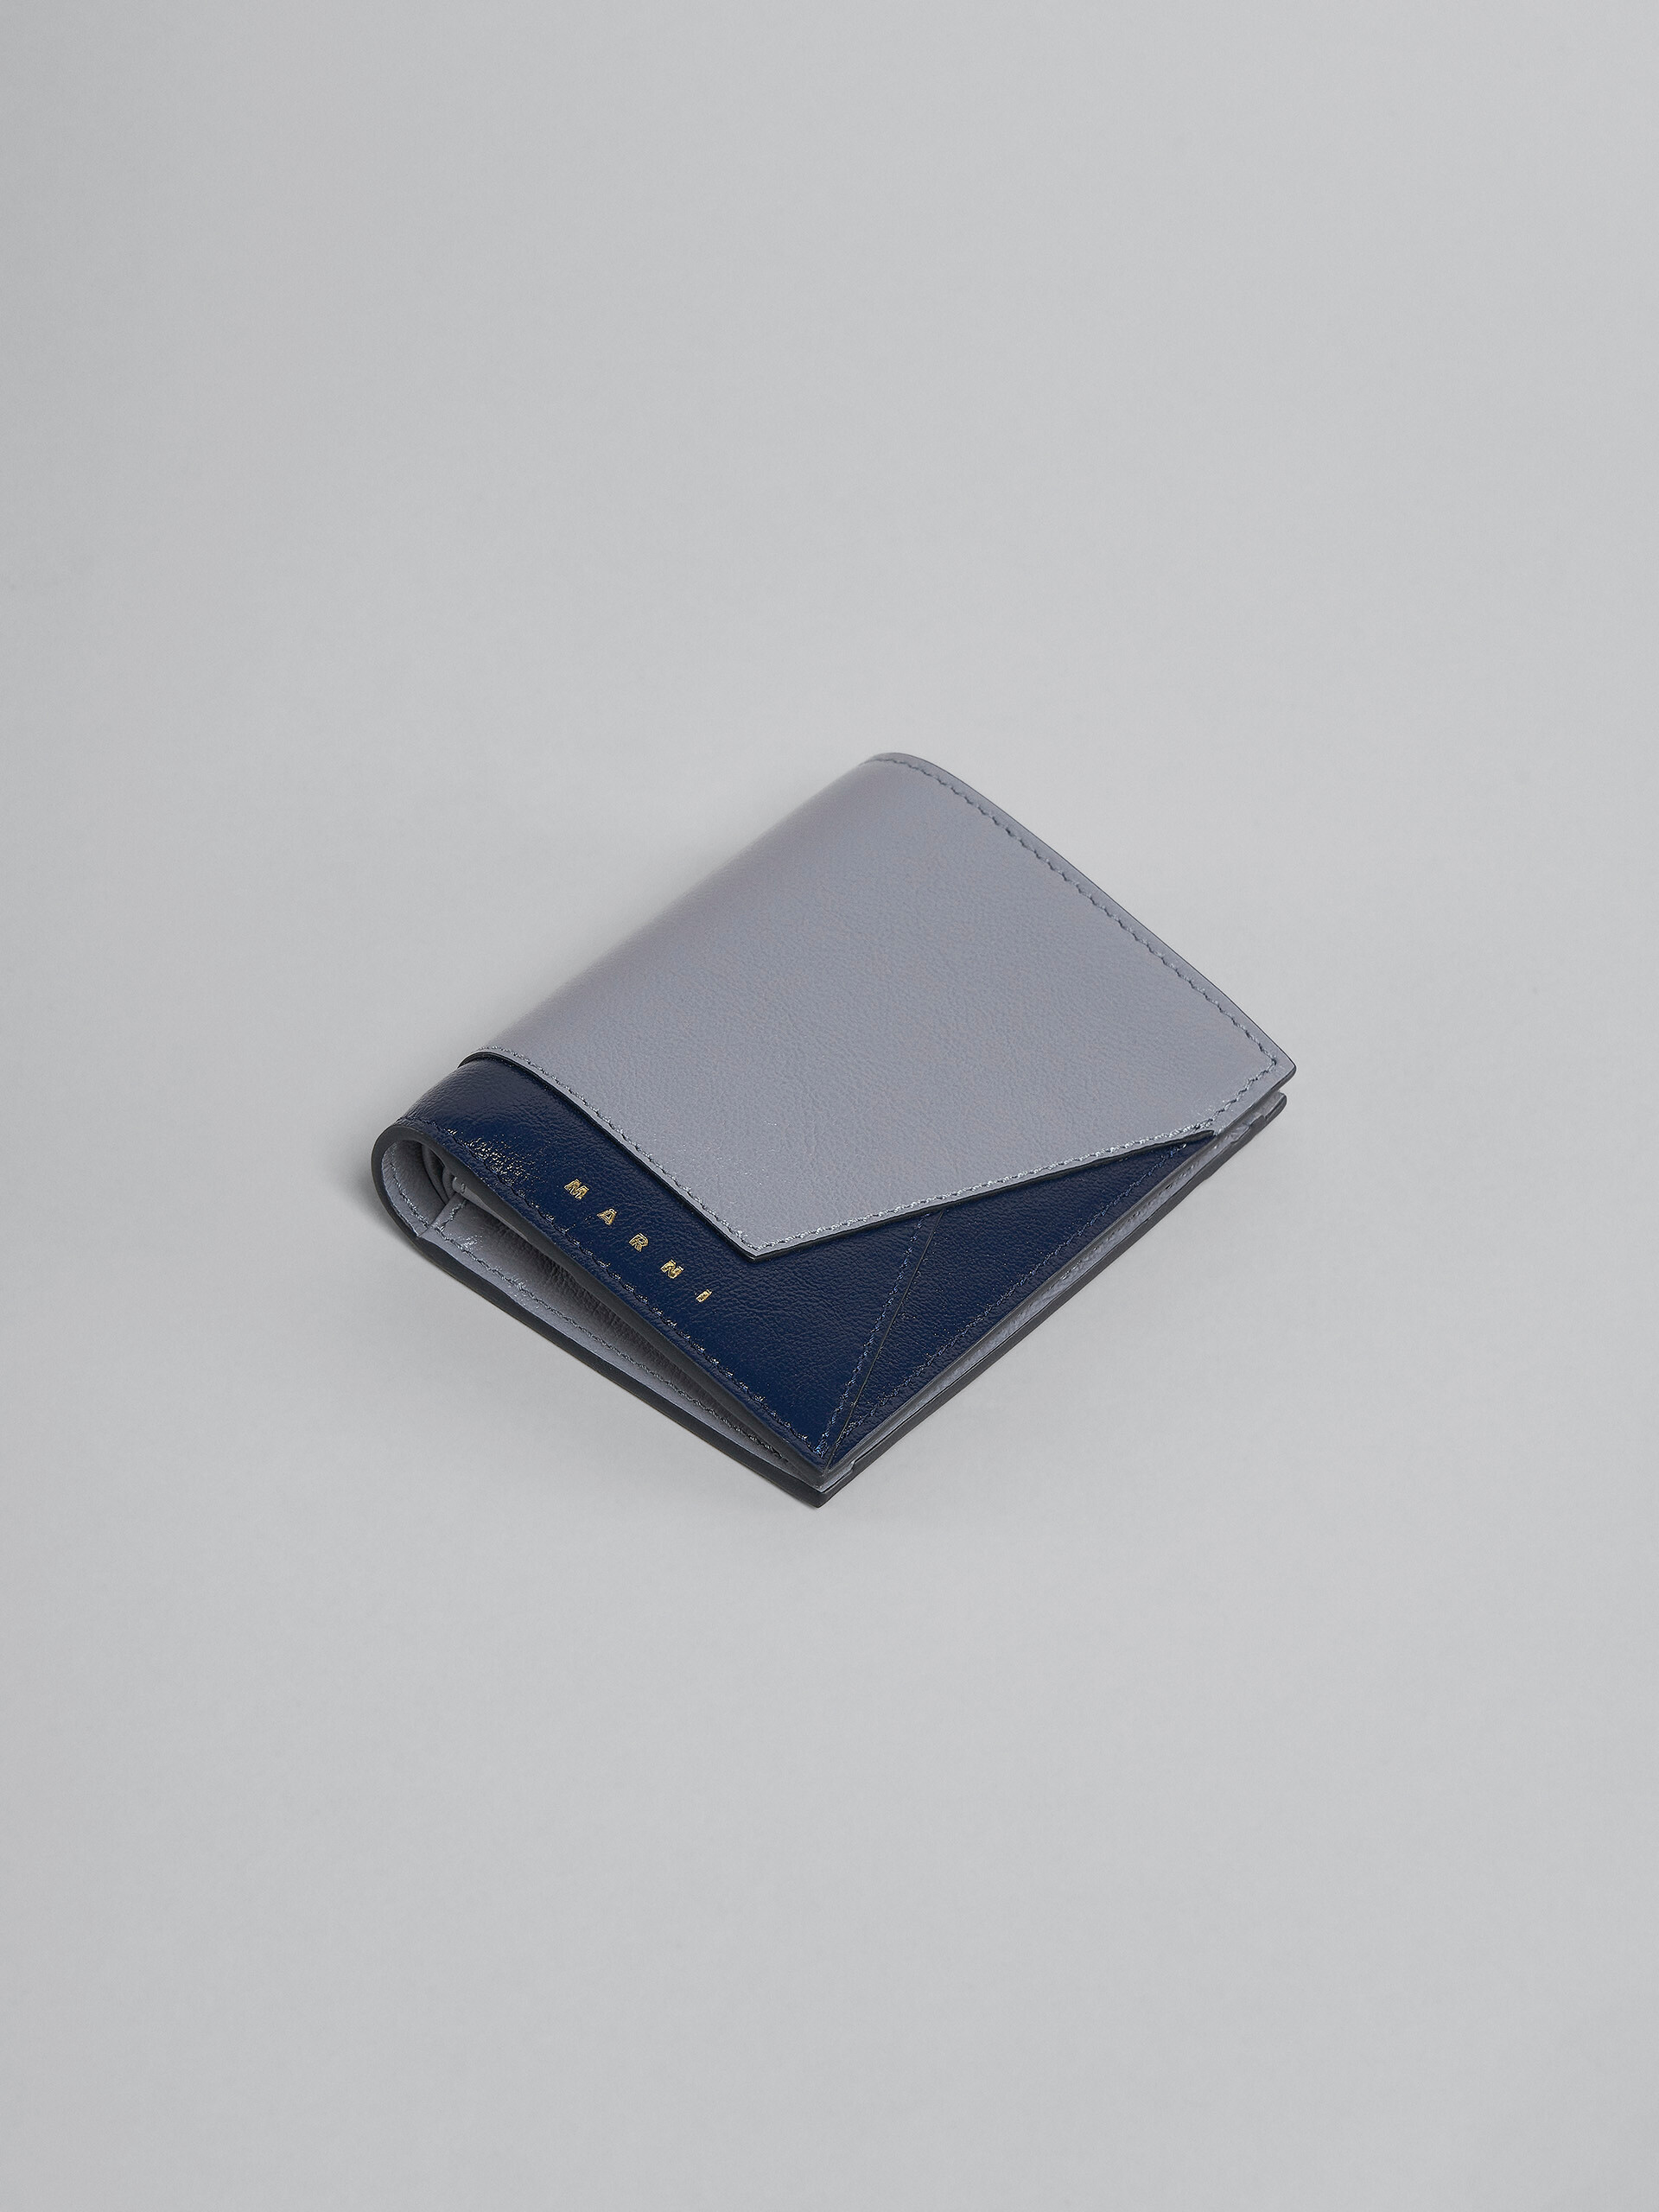 Grey and blue leather bi-fold wallet - Wallets - Image 5